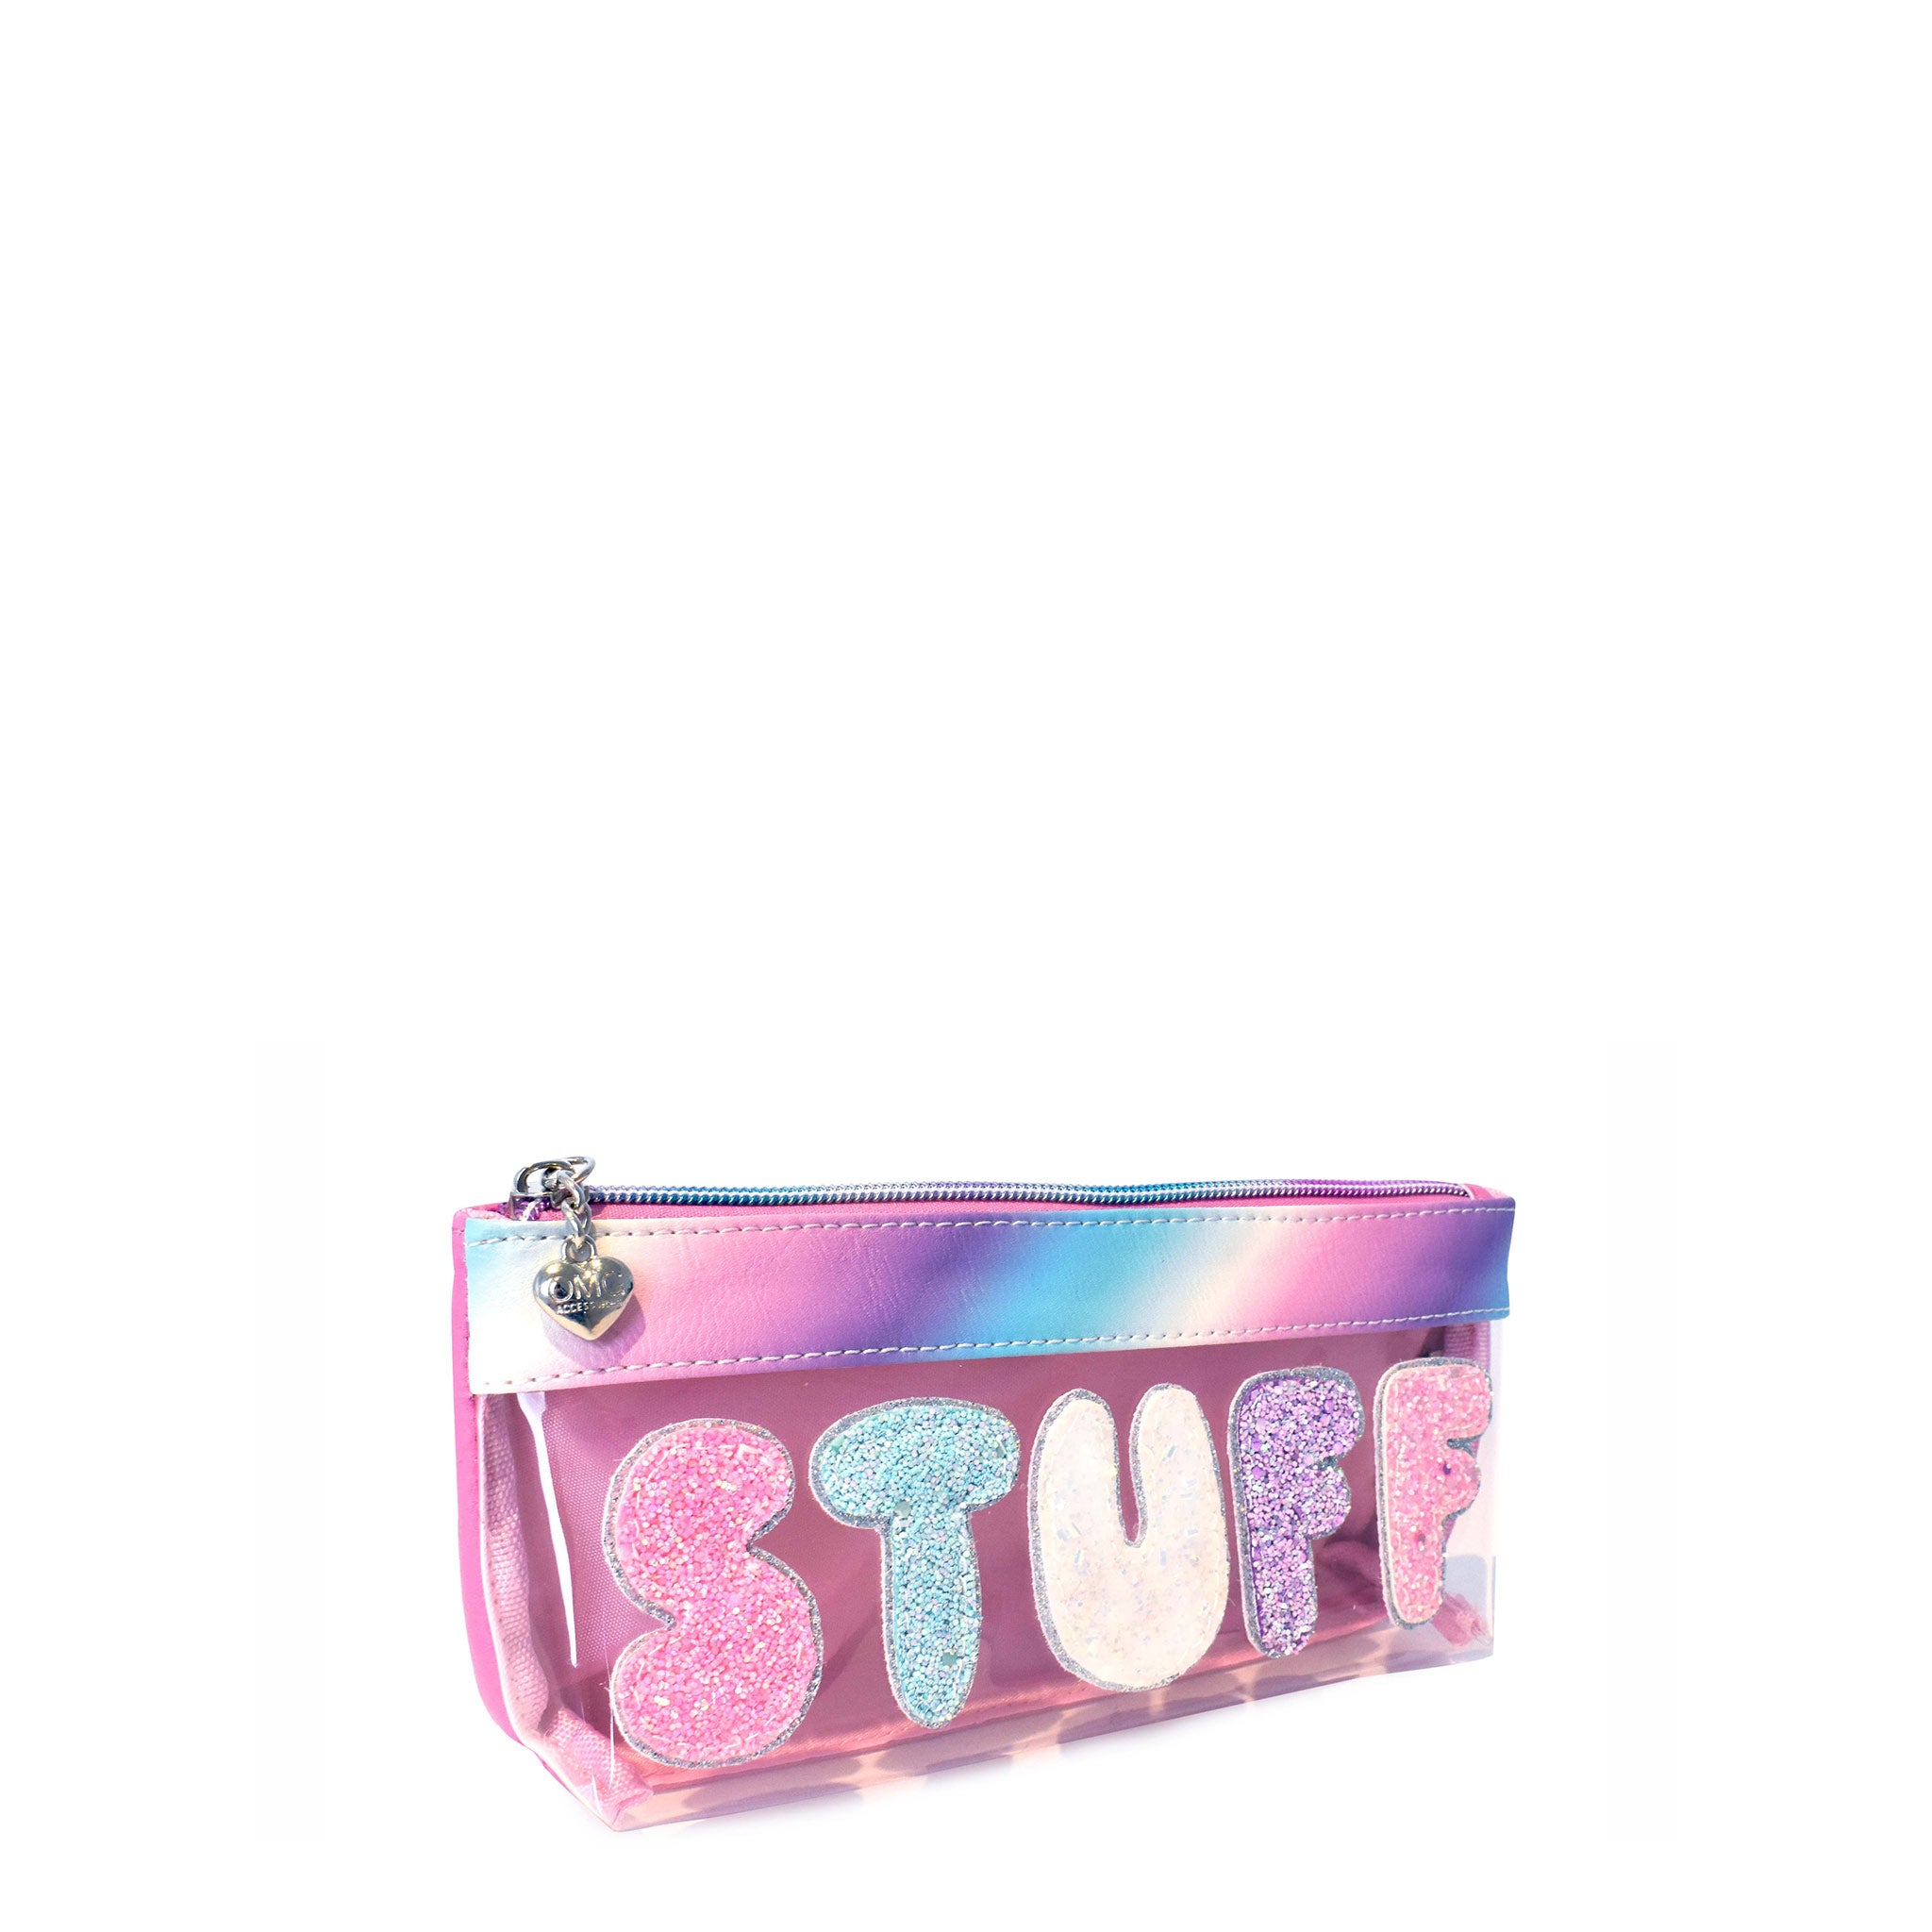 Side  view of a clear pencil pouch with glitter bubble letters 'STUFF' applique